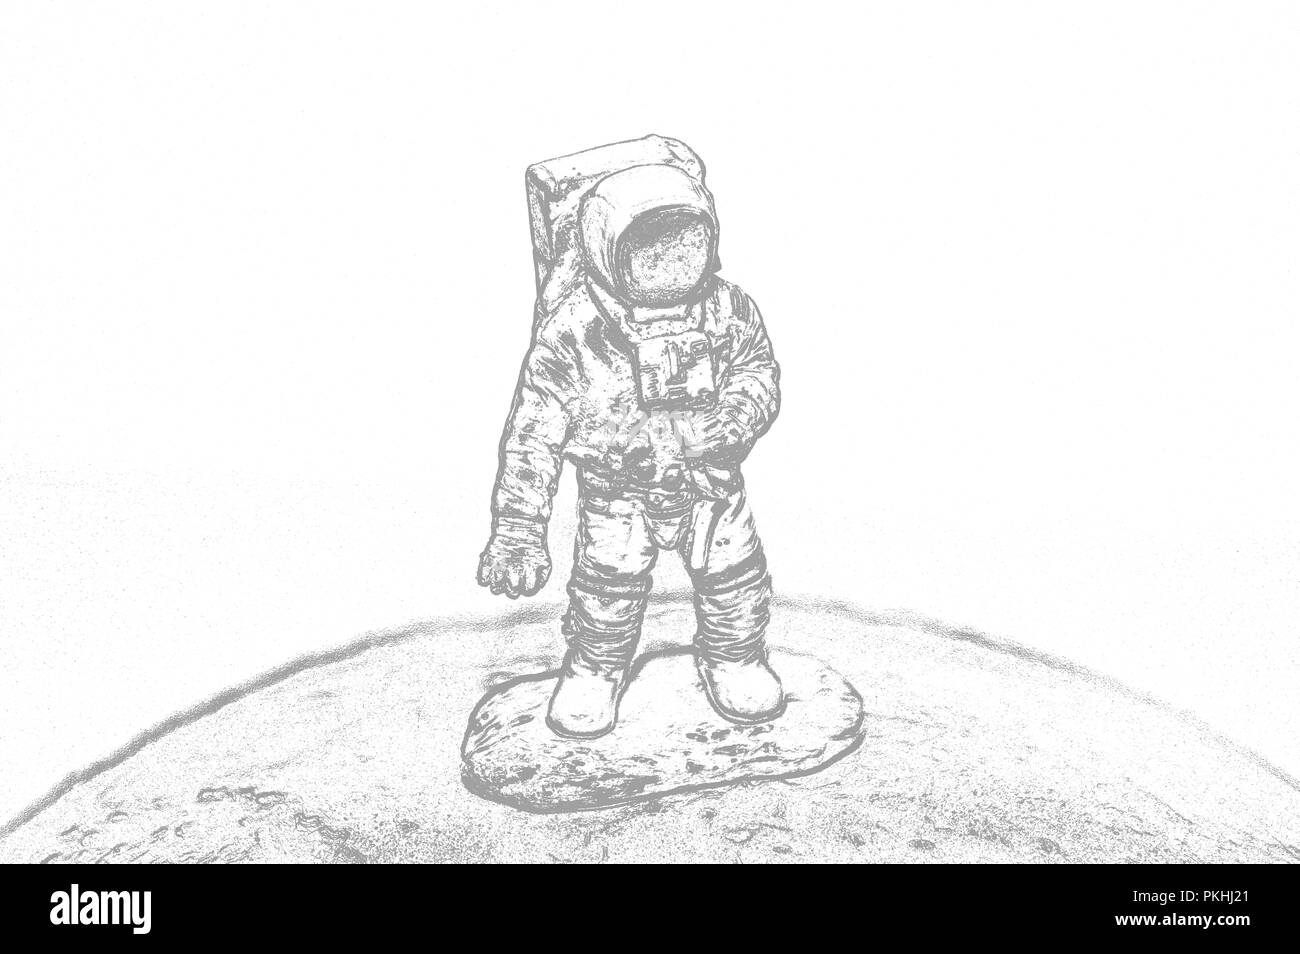 An astronaut on the moon in a space suit. Illustration Stock Photo